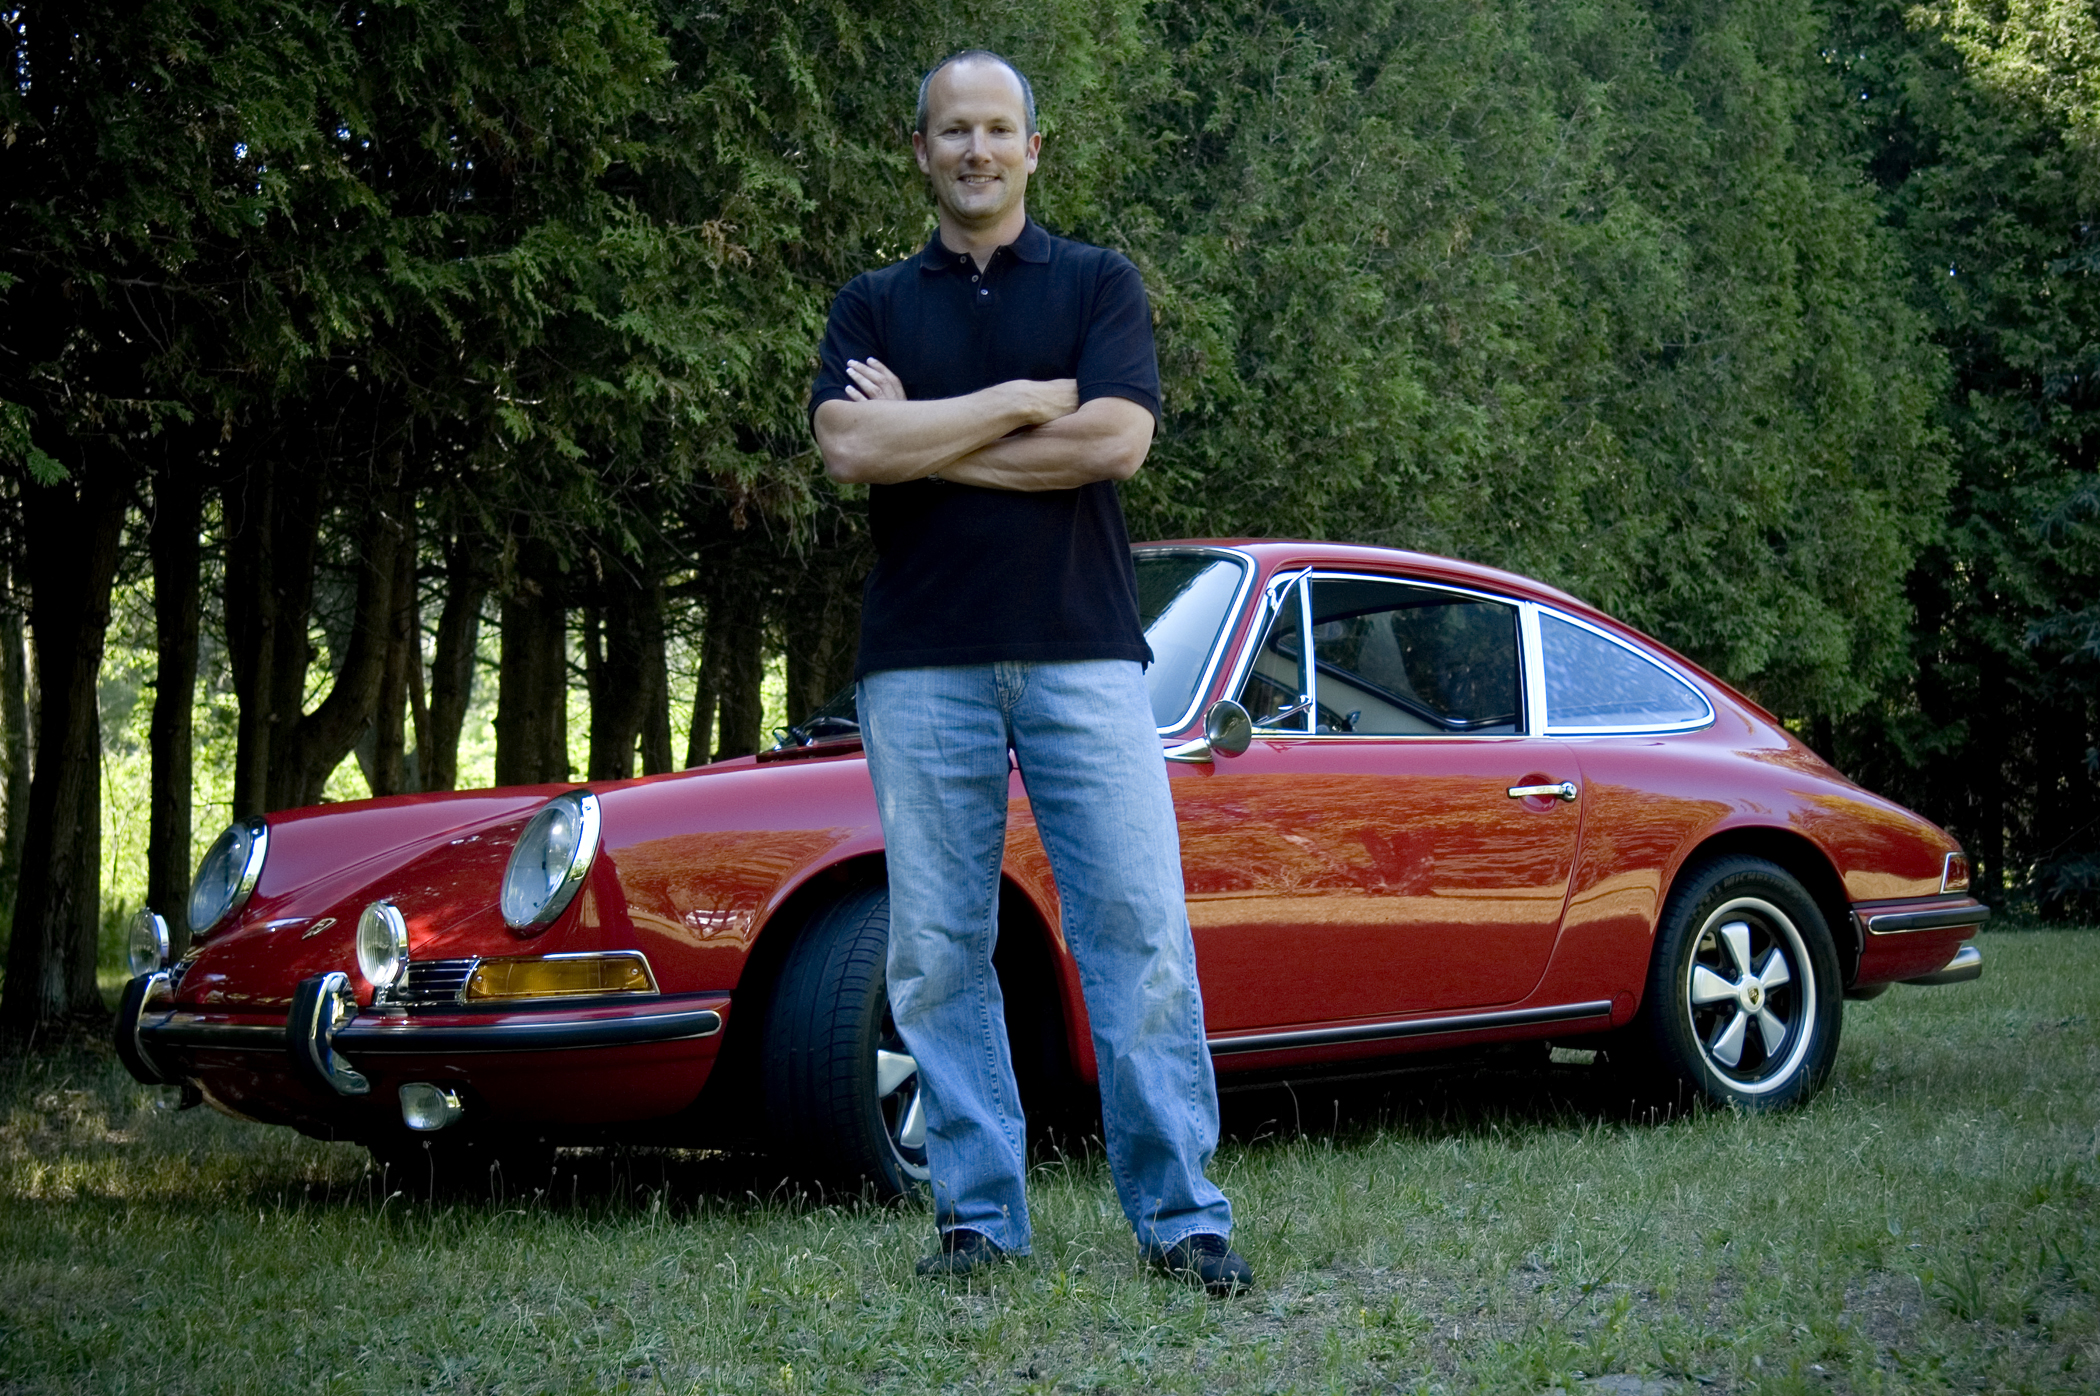 Hagerty and his 911